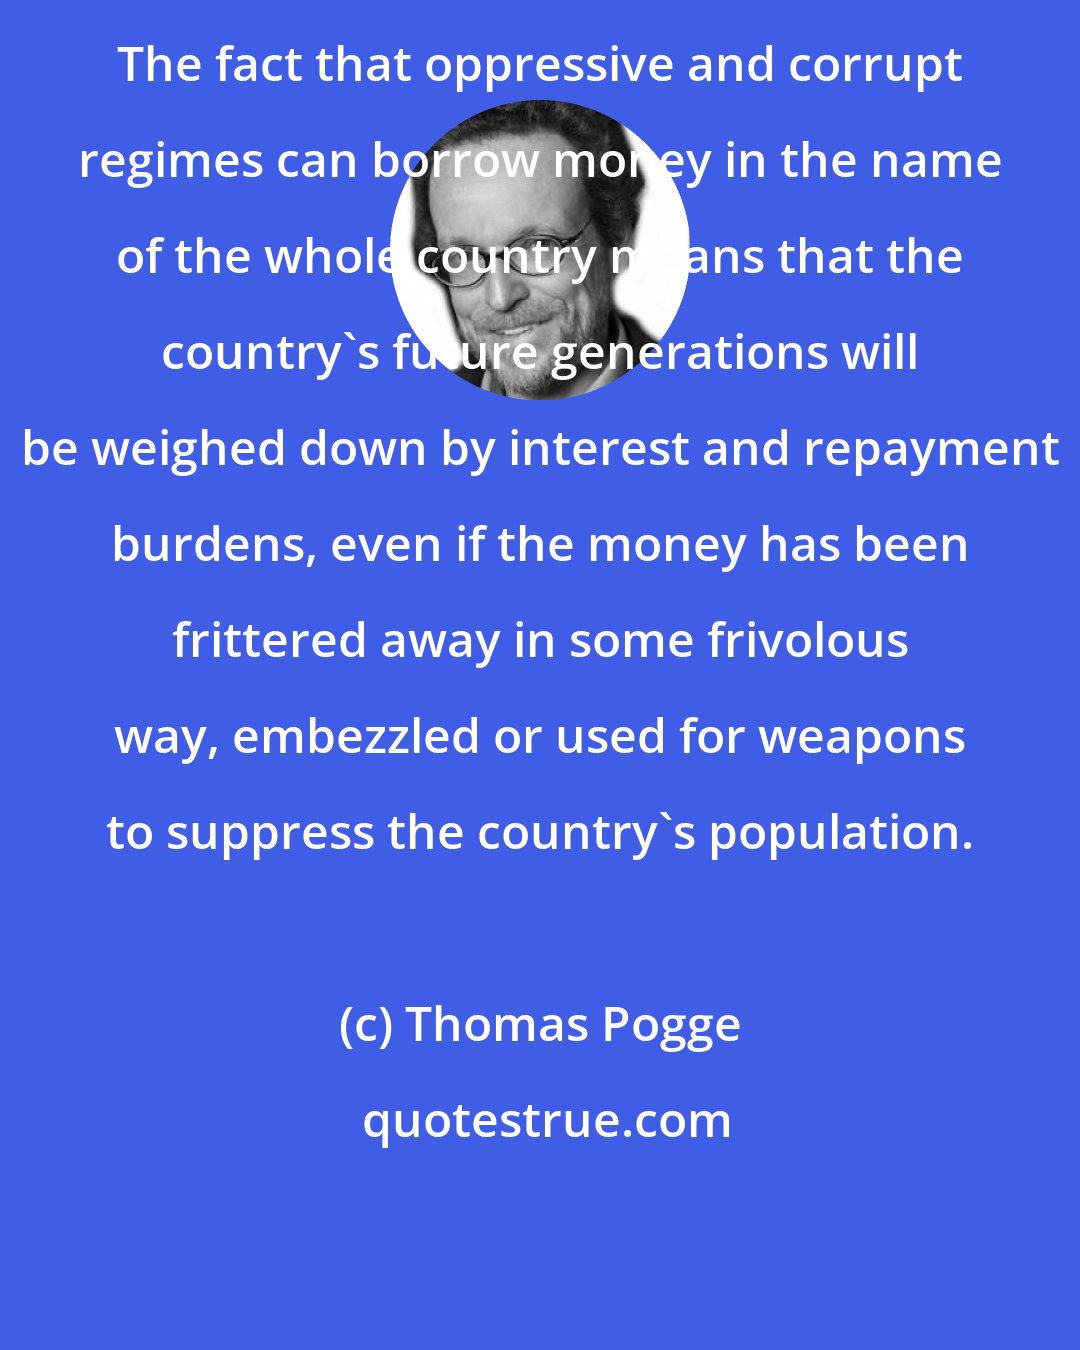 Thomas Pogge: The fact that oppressive and corrupt regimes can borrow money in the name of the whole country means that the country's future generations will be weighed down by interest and repayment burdens, even if the money has been frittered away in some frivolous way, embezzled or used for weapons to suppress the country's population.